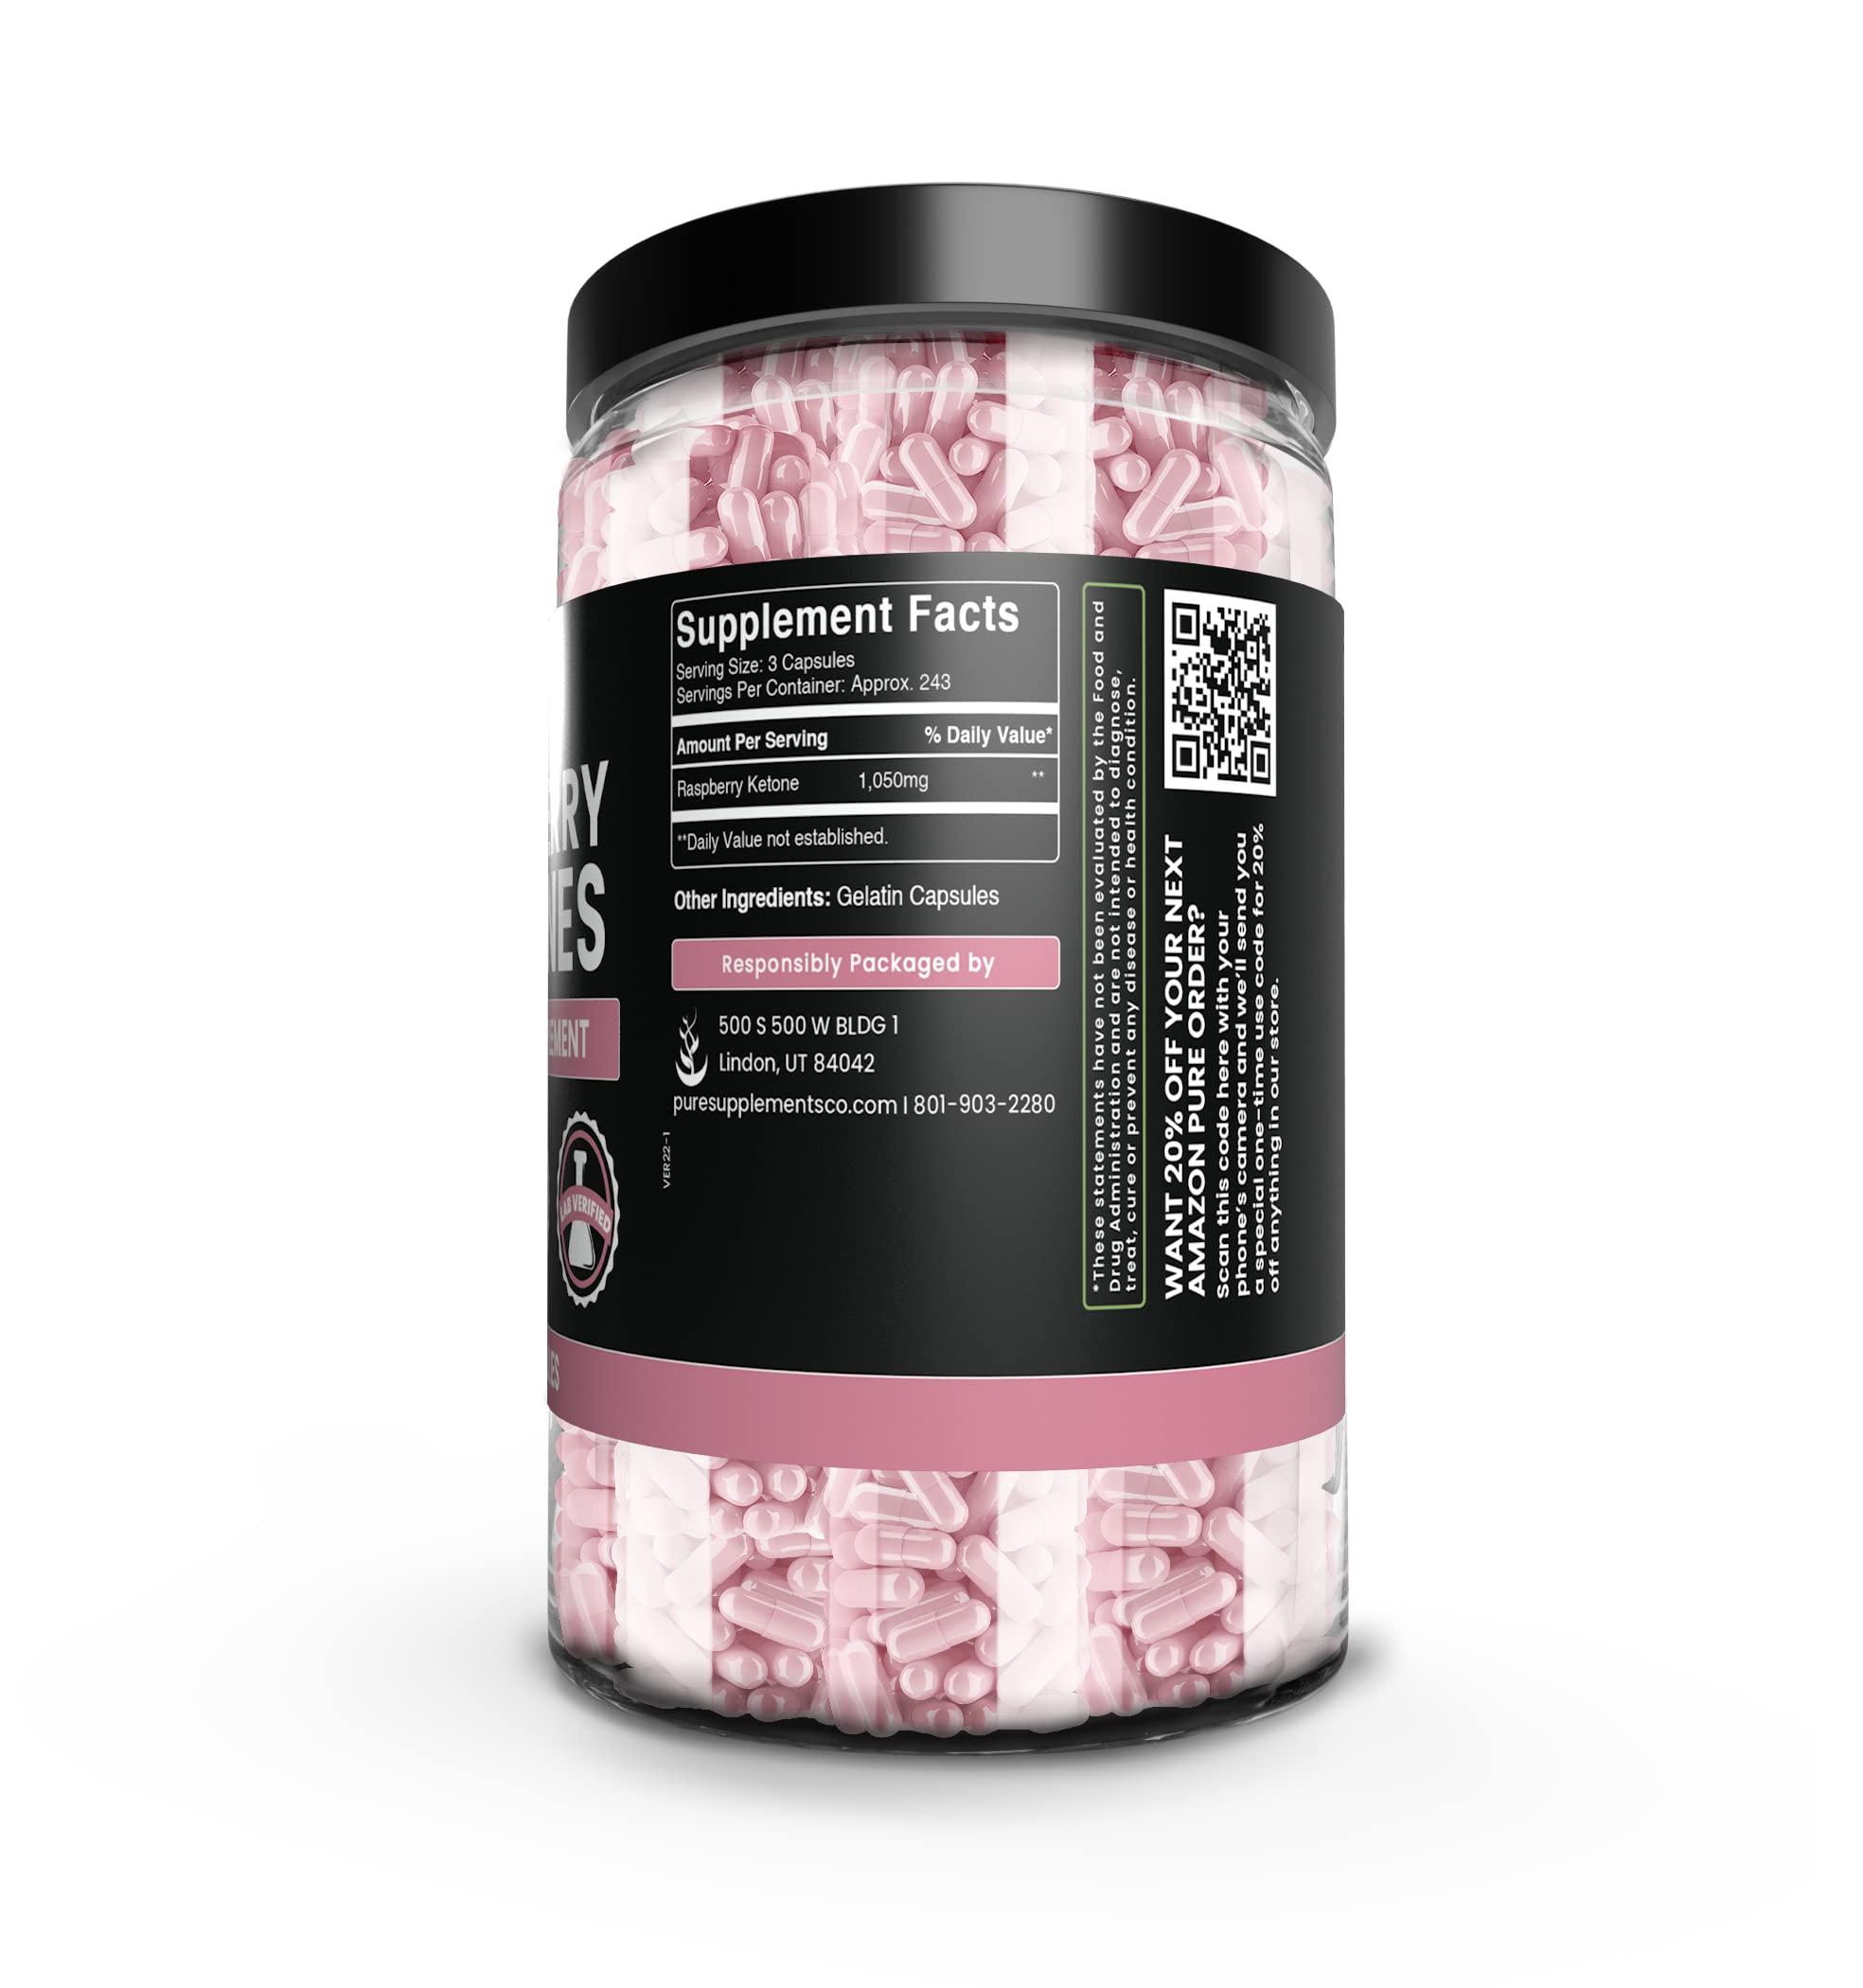 PURE ORIGINAL INGREDIENTS Raspberry Ketone and Green Coffee Bean Extract Bundle, Various Sizes, No Fillers, Lab Verified